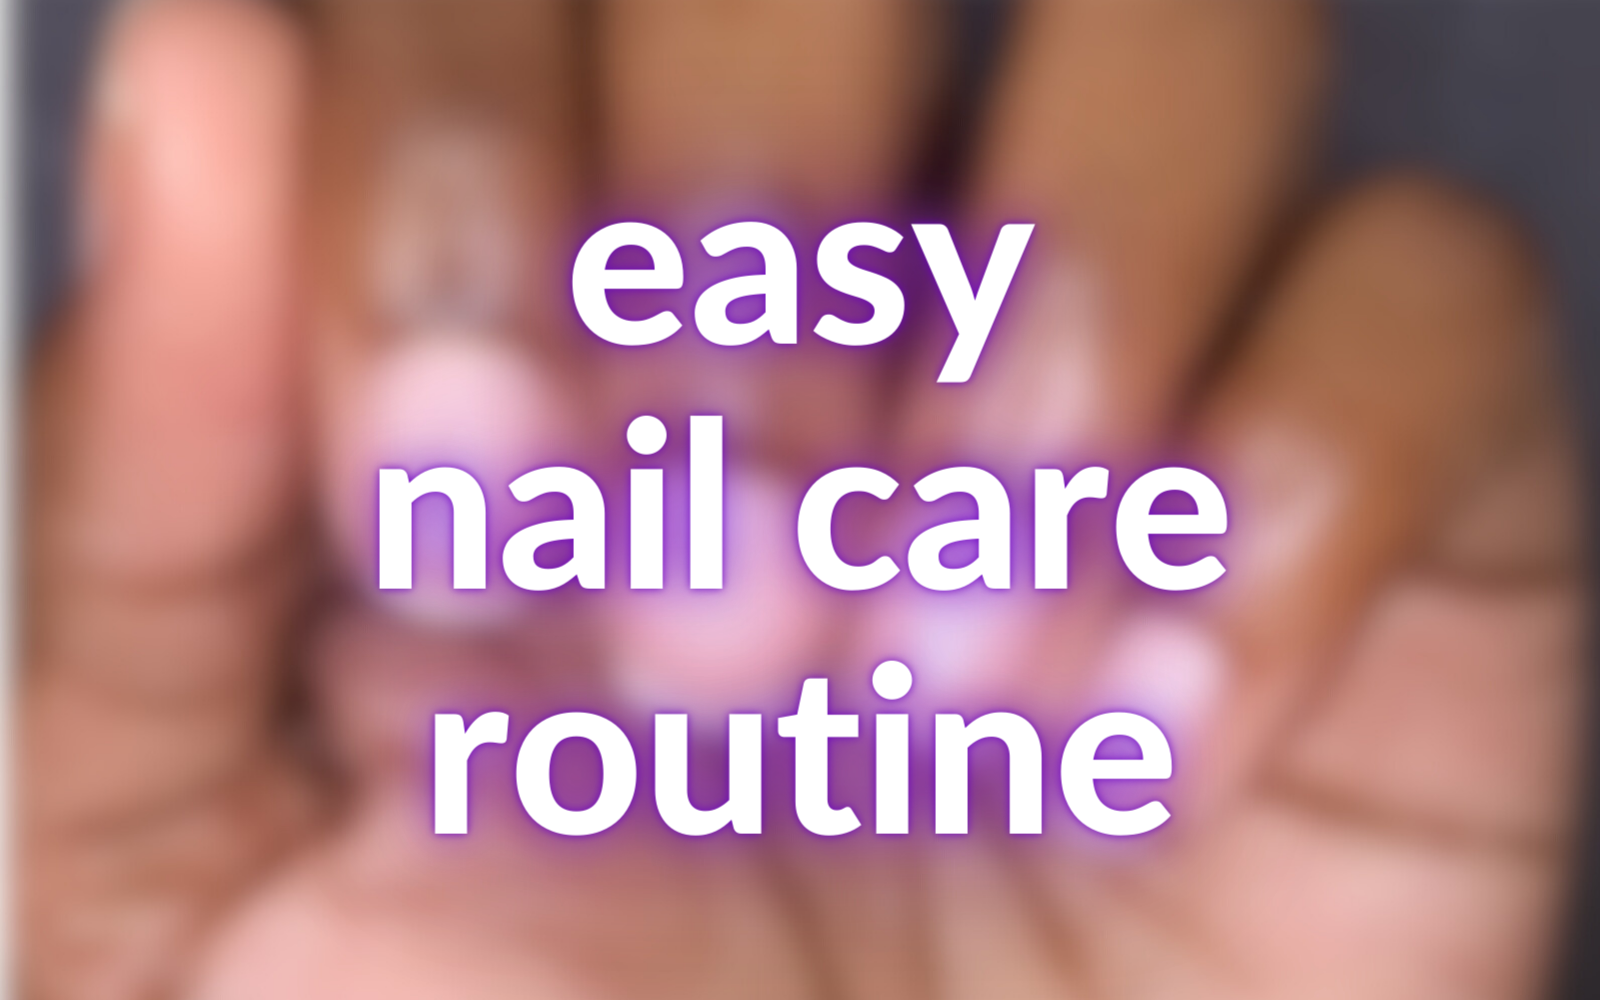 1. Easy Step-by-Step Nail Art Tutorials for Beginners - wide 4